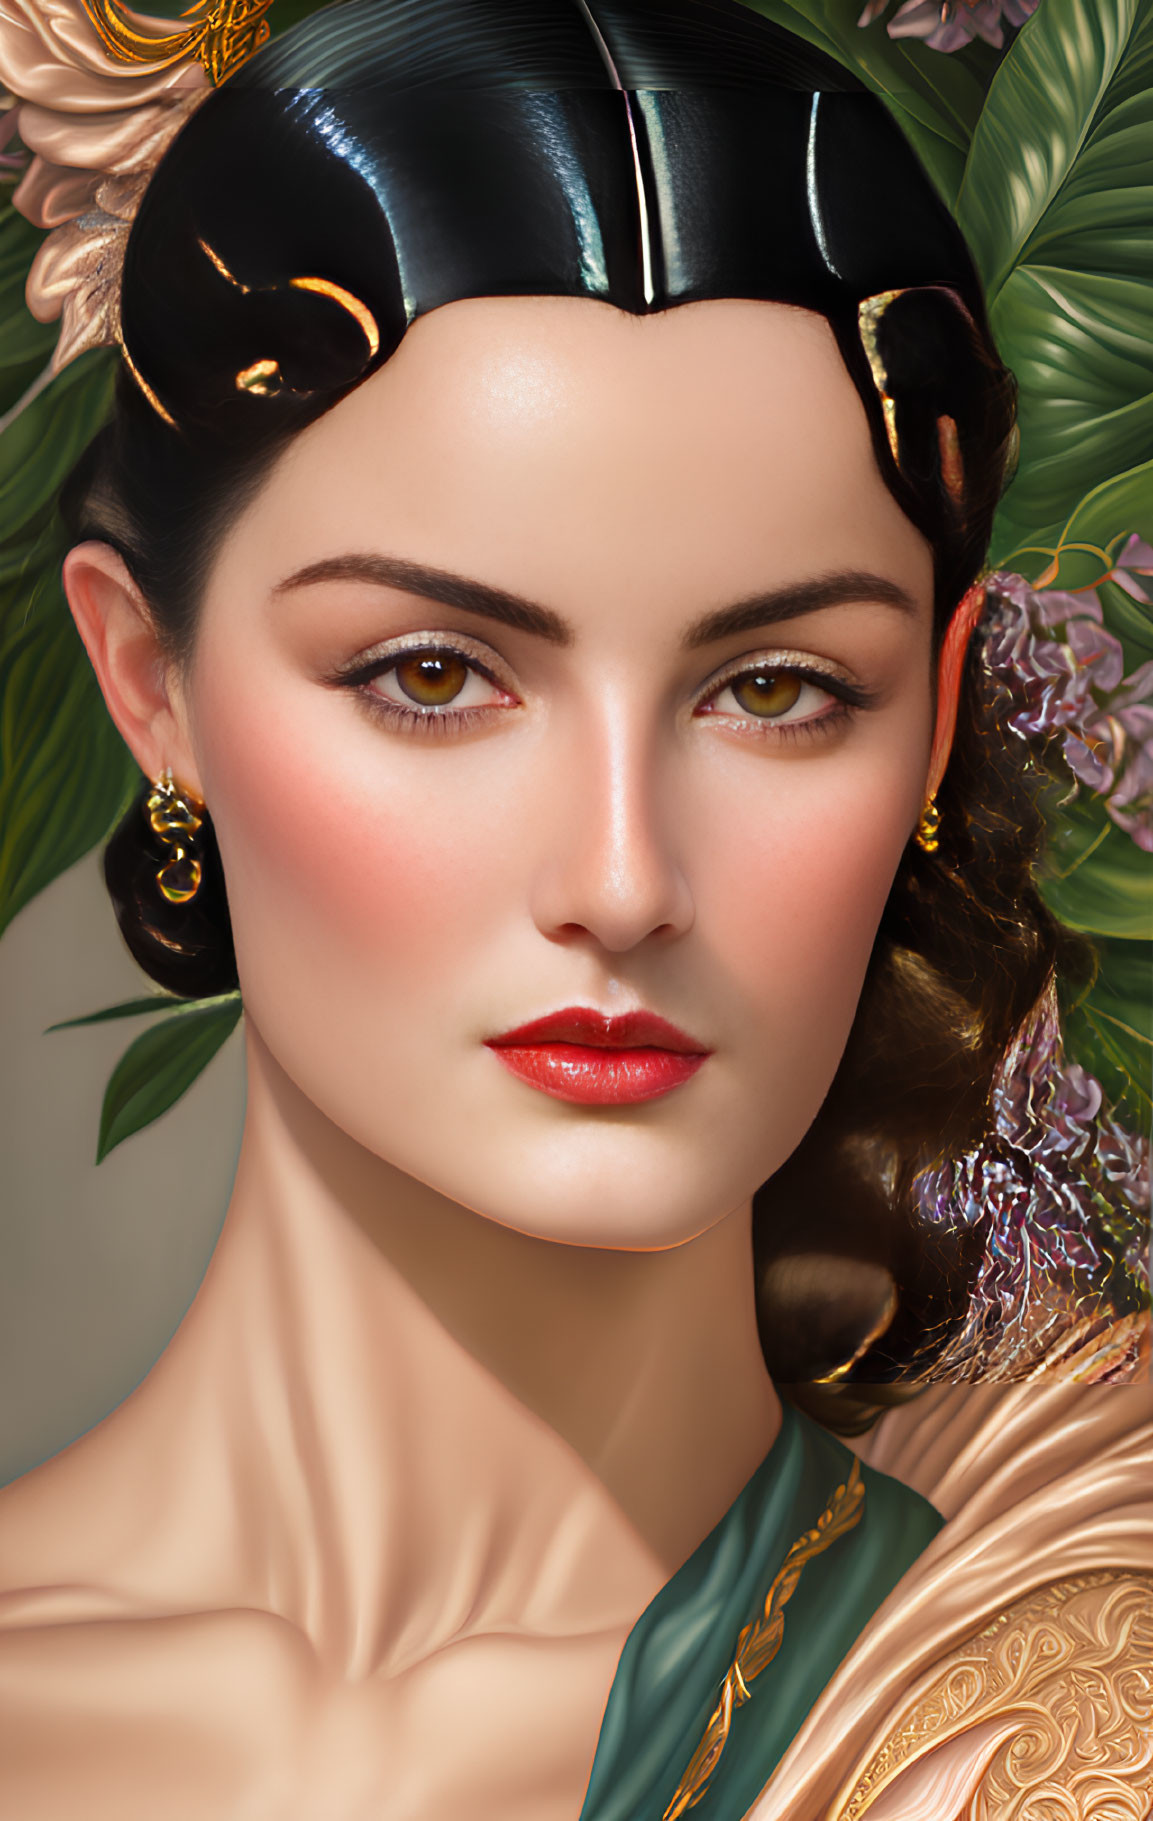 Digital portrait of a woman with elegant features and traditional updo.